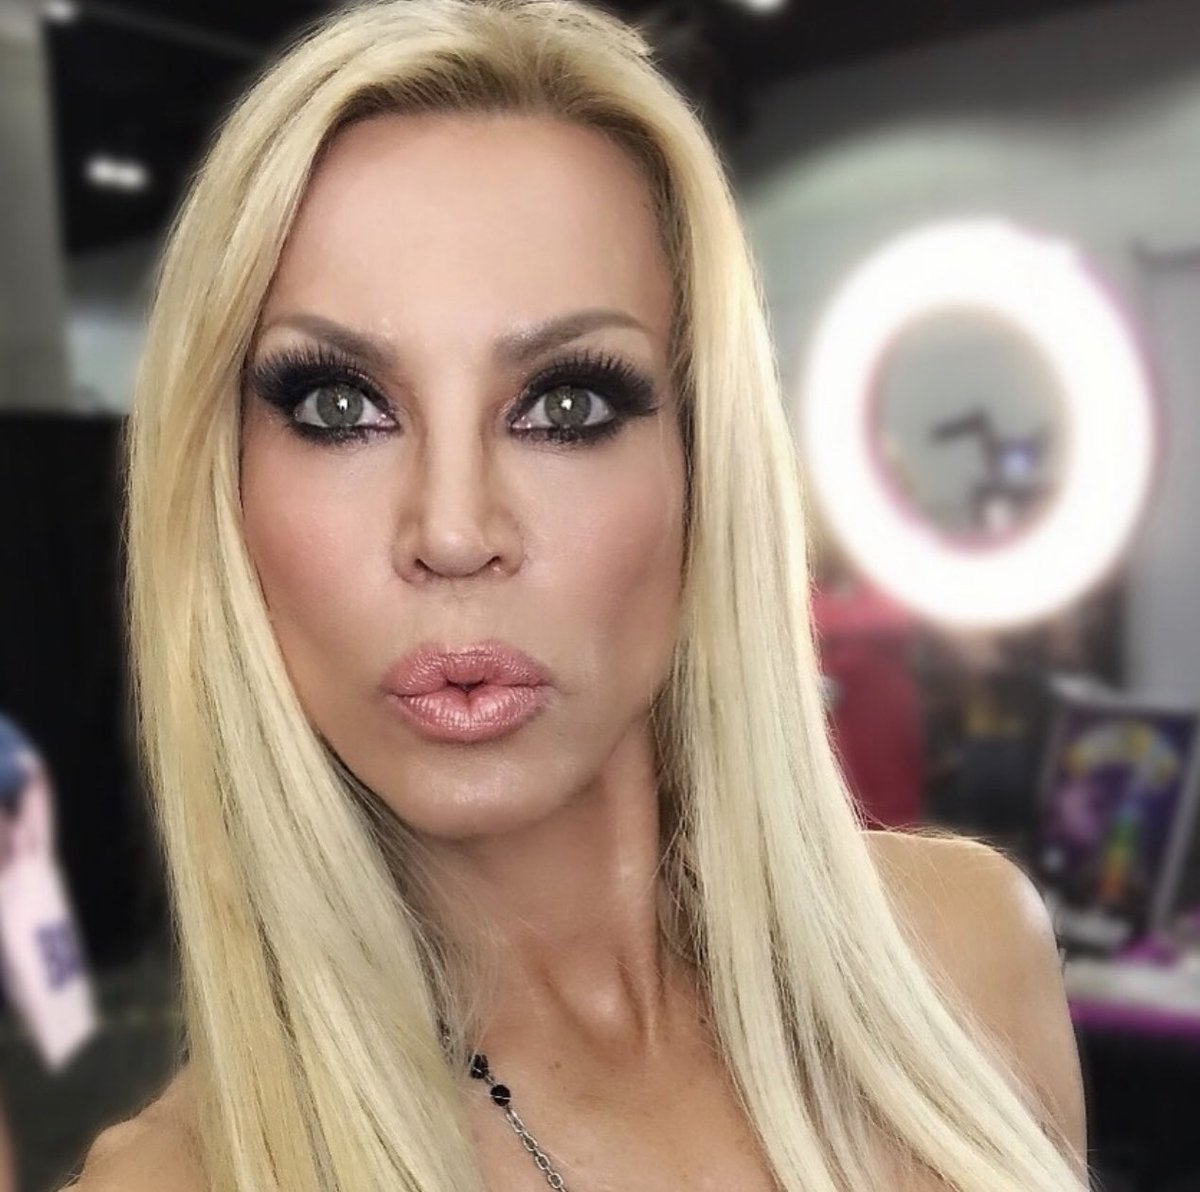 Fans: Subscribe now and join us on onlyfans.com/AmberLynn for our members only live show tonight at 6 pm PST Don’t Miss It! Amber Lynn®️💋